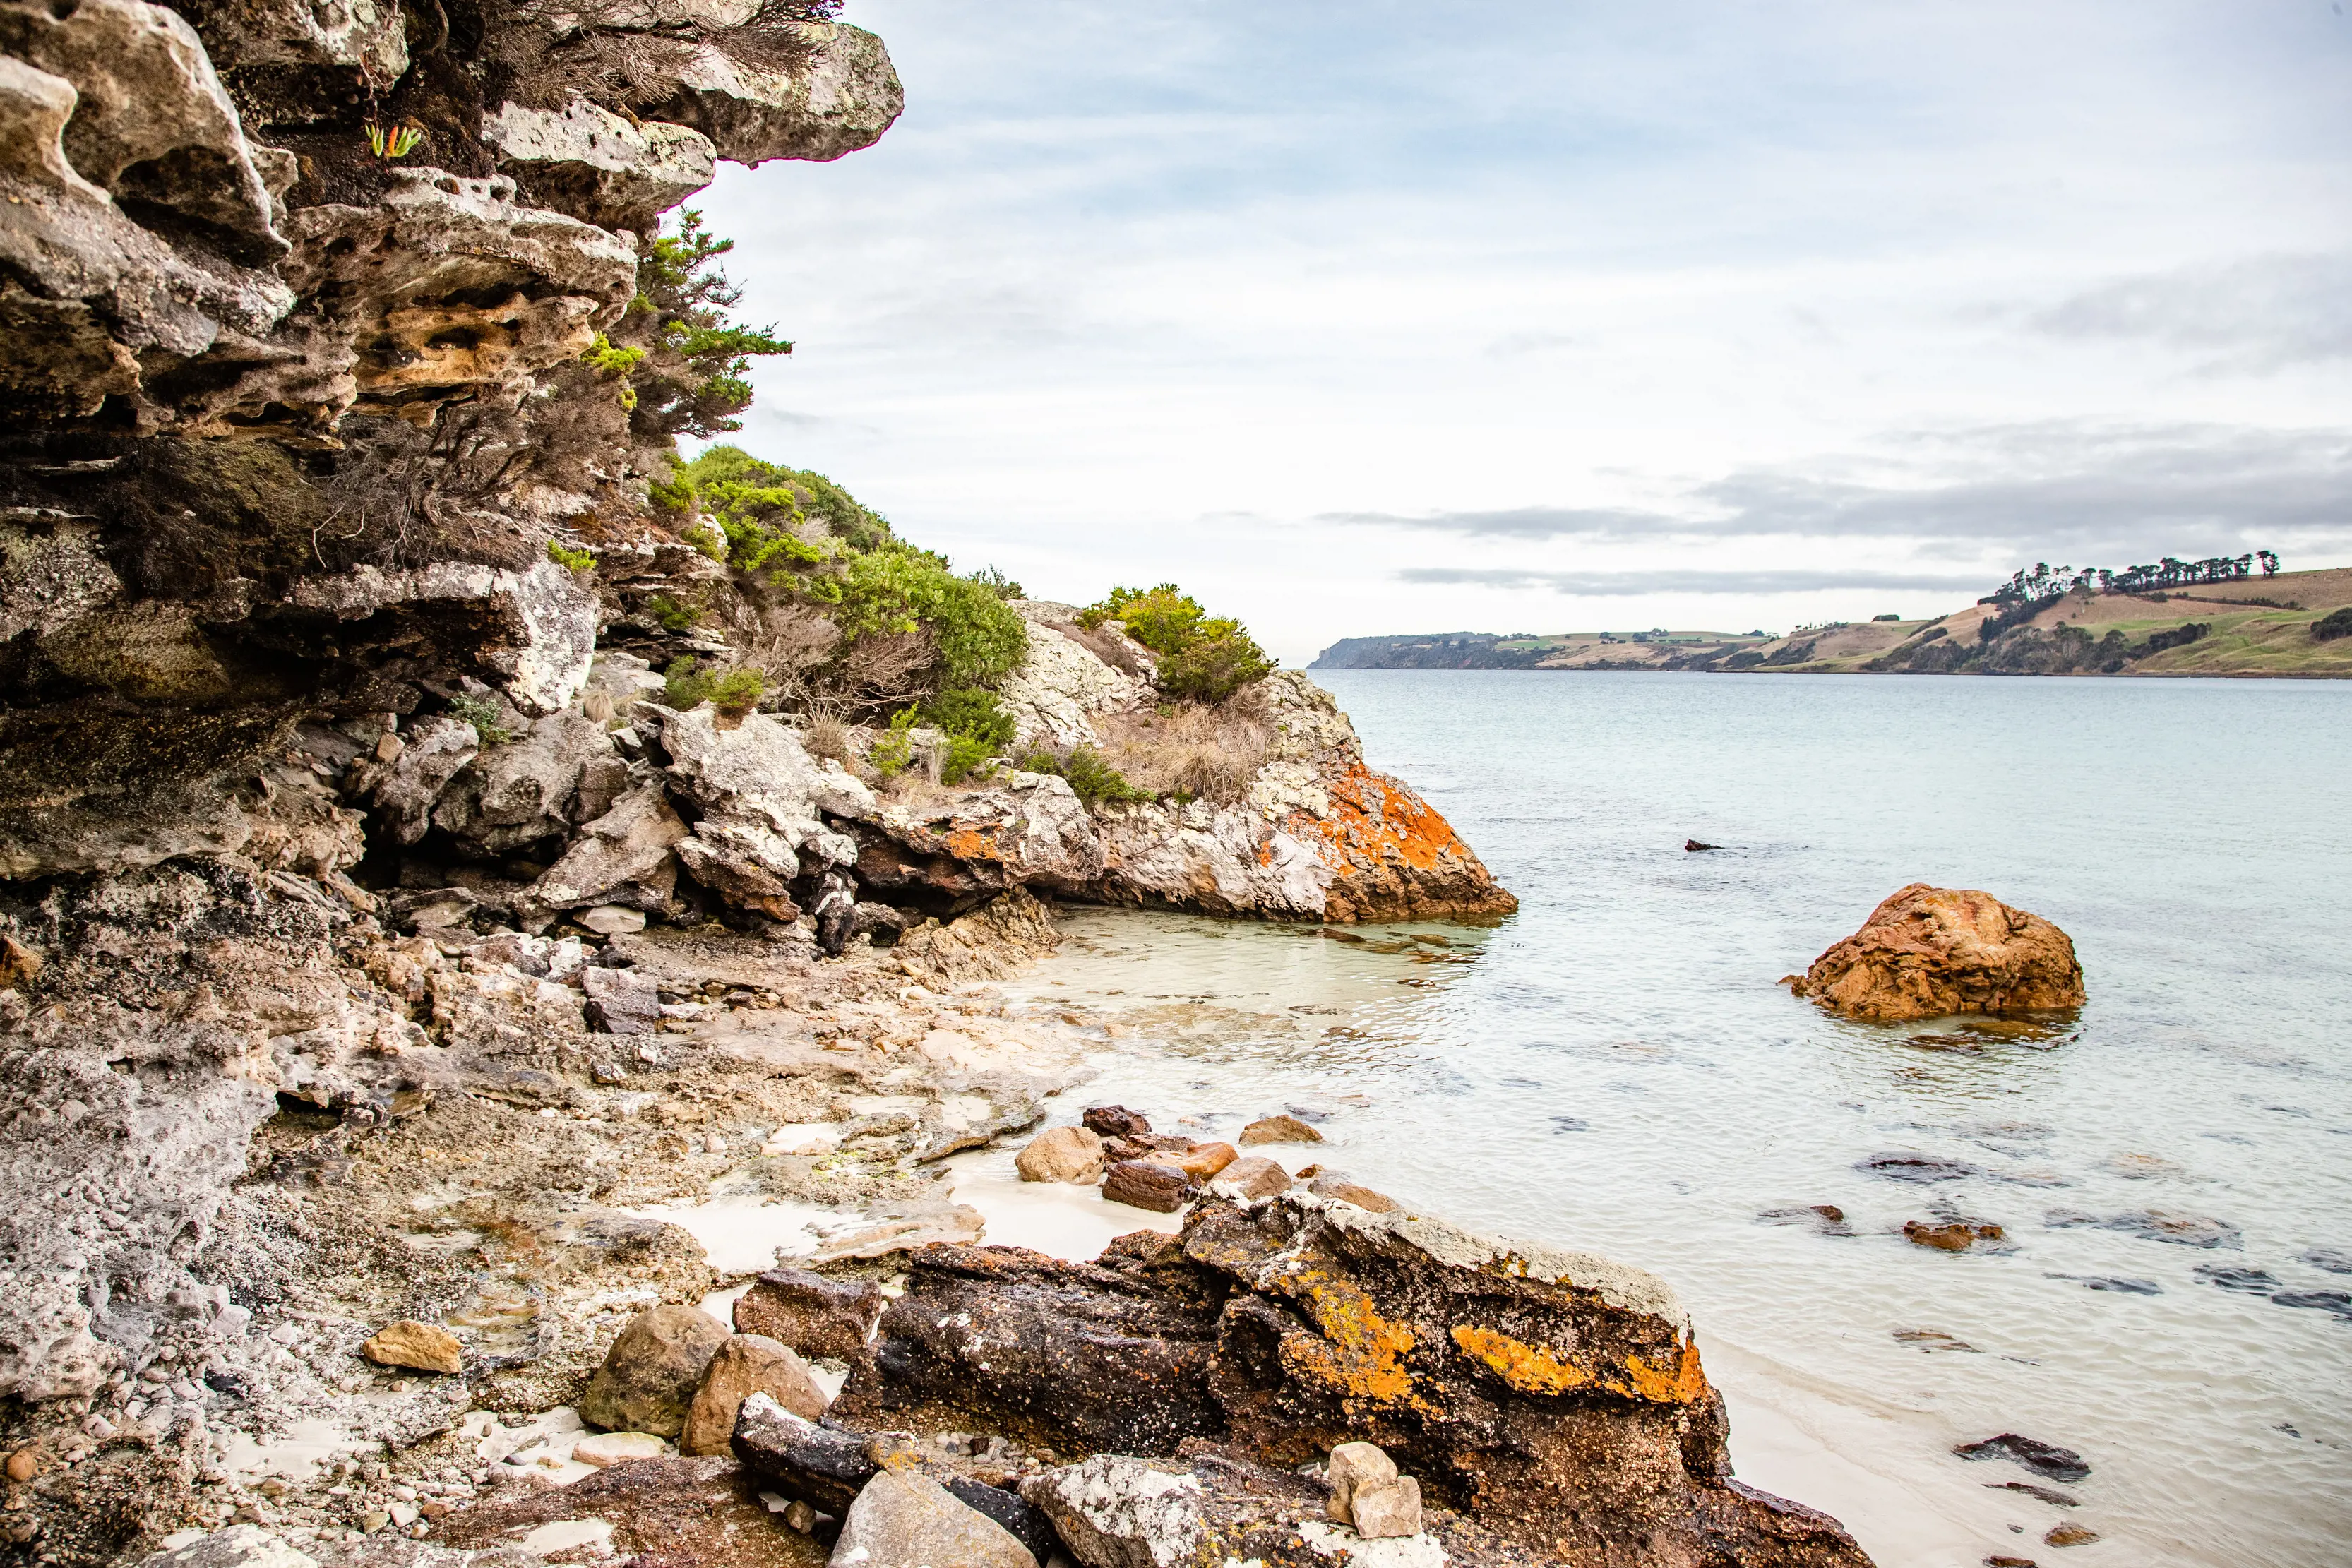 A shallow rock cave fills the left side of the image that runs to the clear water of Boat Harbour.